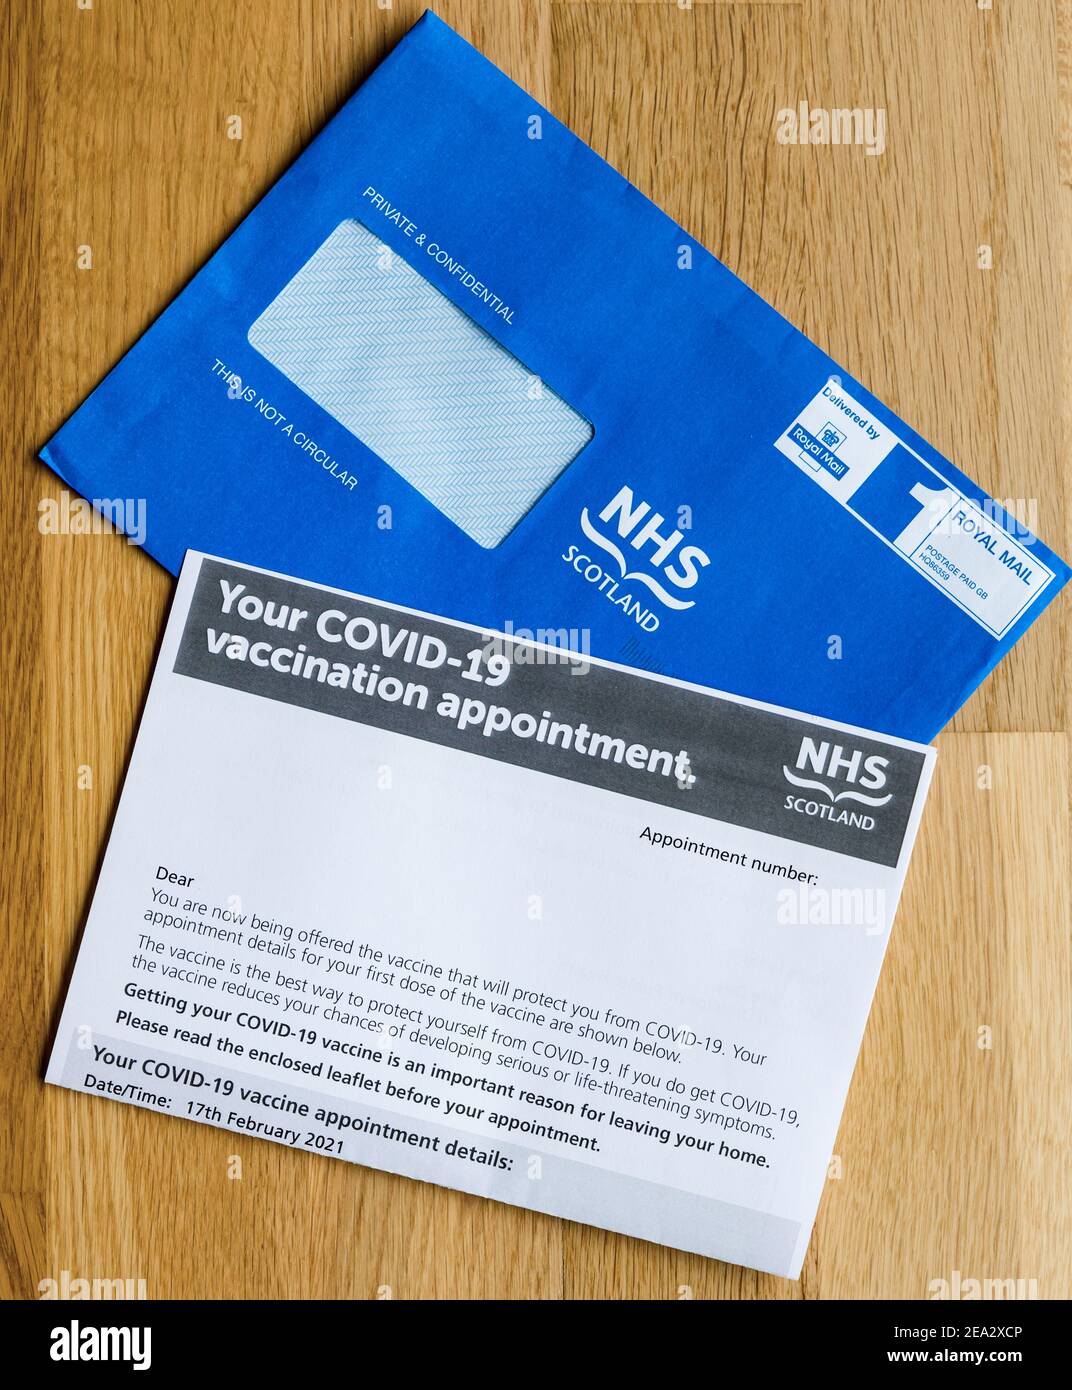 NHS Scotland blue envelope and vaccine appointment letter during Covid-19 coronavirus pandemic, UK Stock Photo